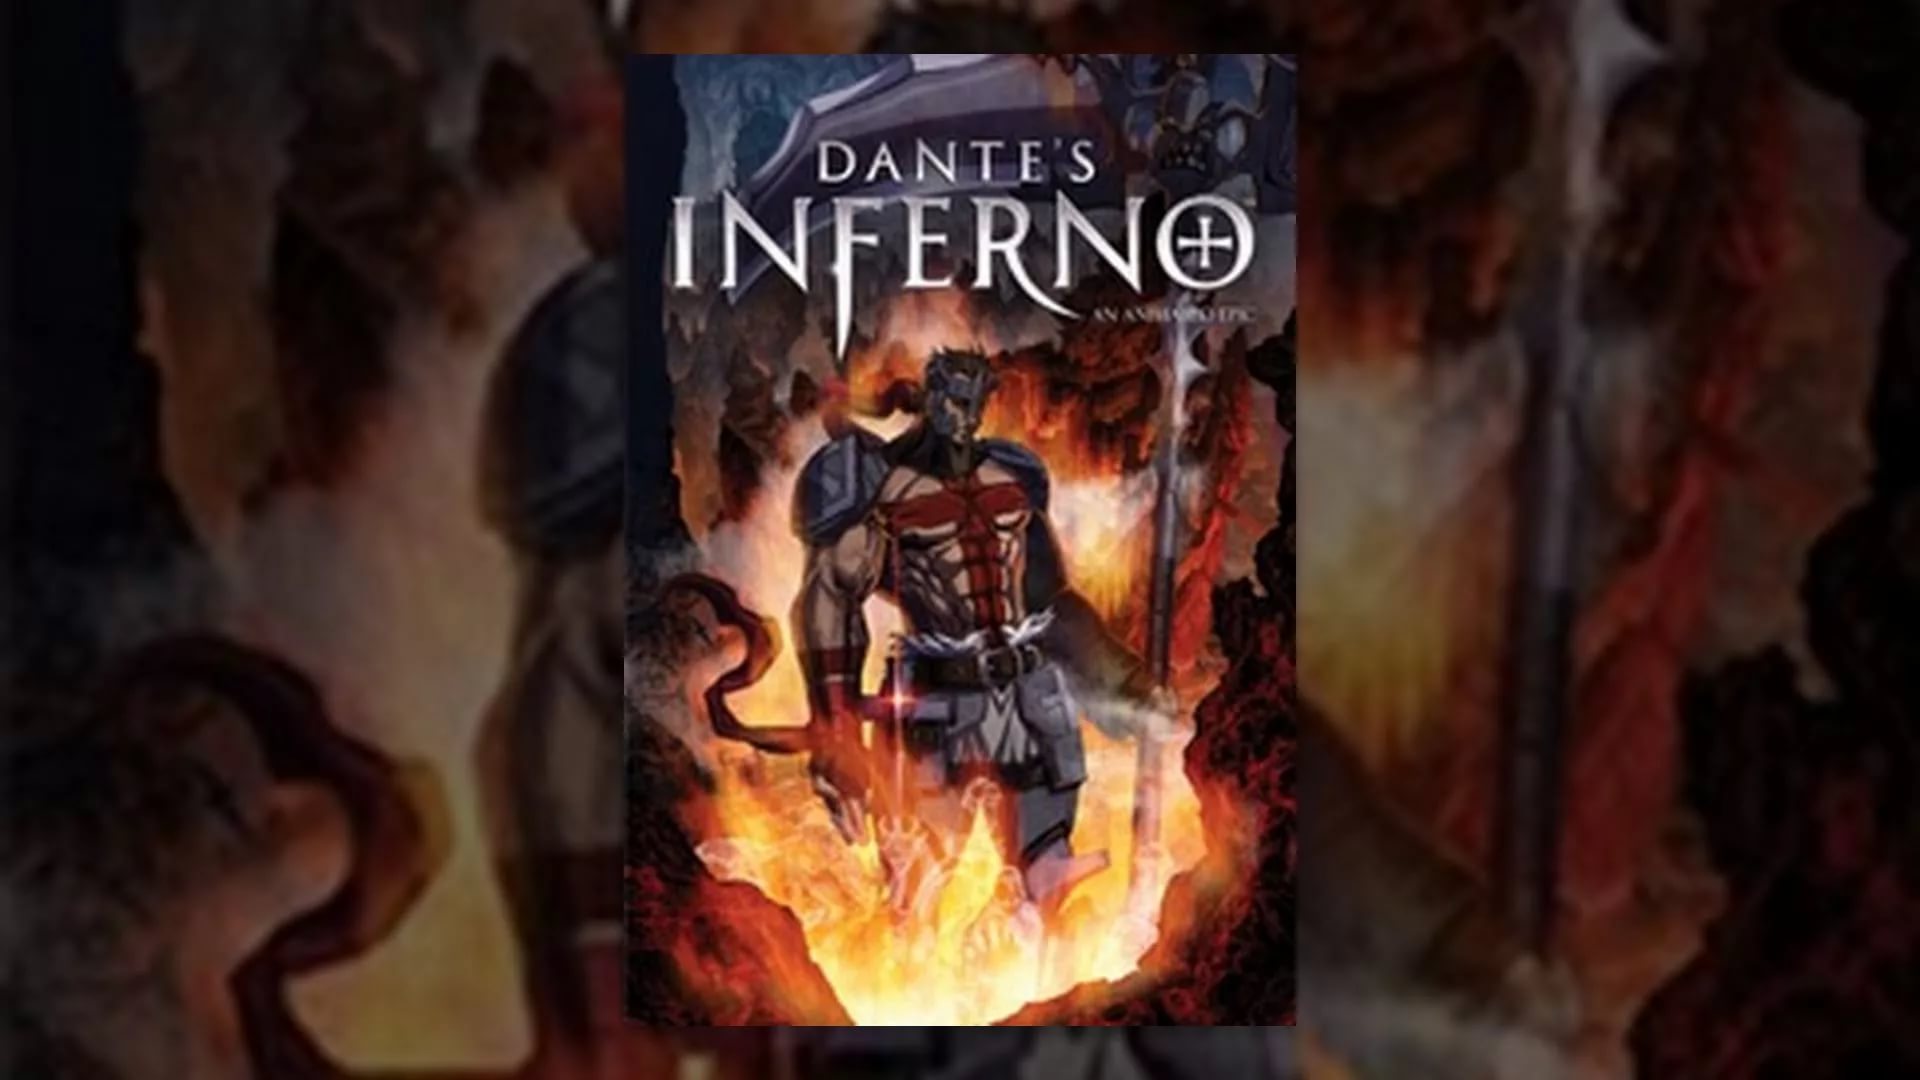 Dante's Inferno Hd Wallpaper - Dante's Inferno An Animated Epic , HD Wallpaper & Backgrounds